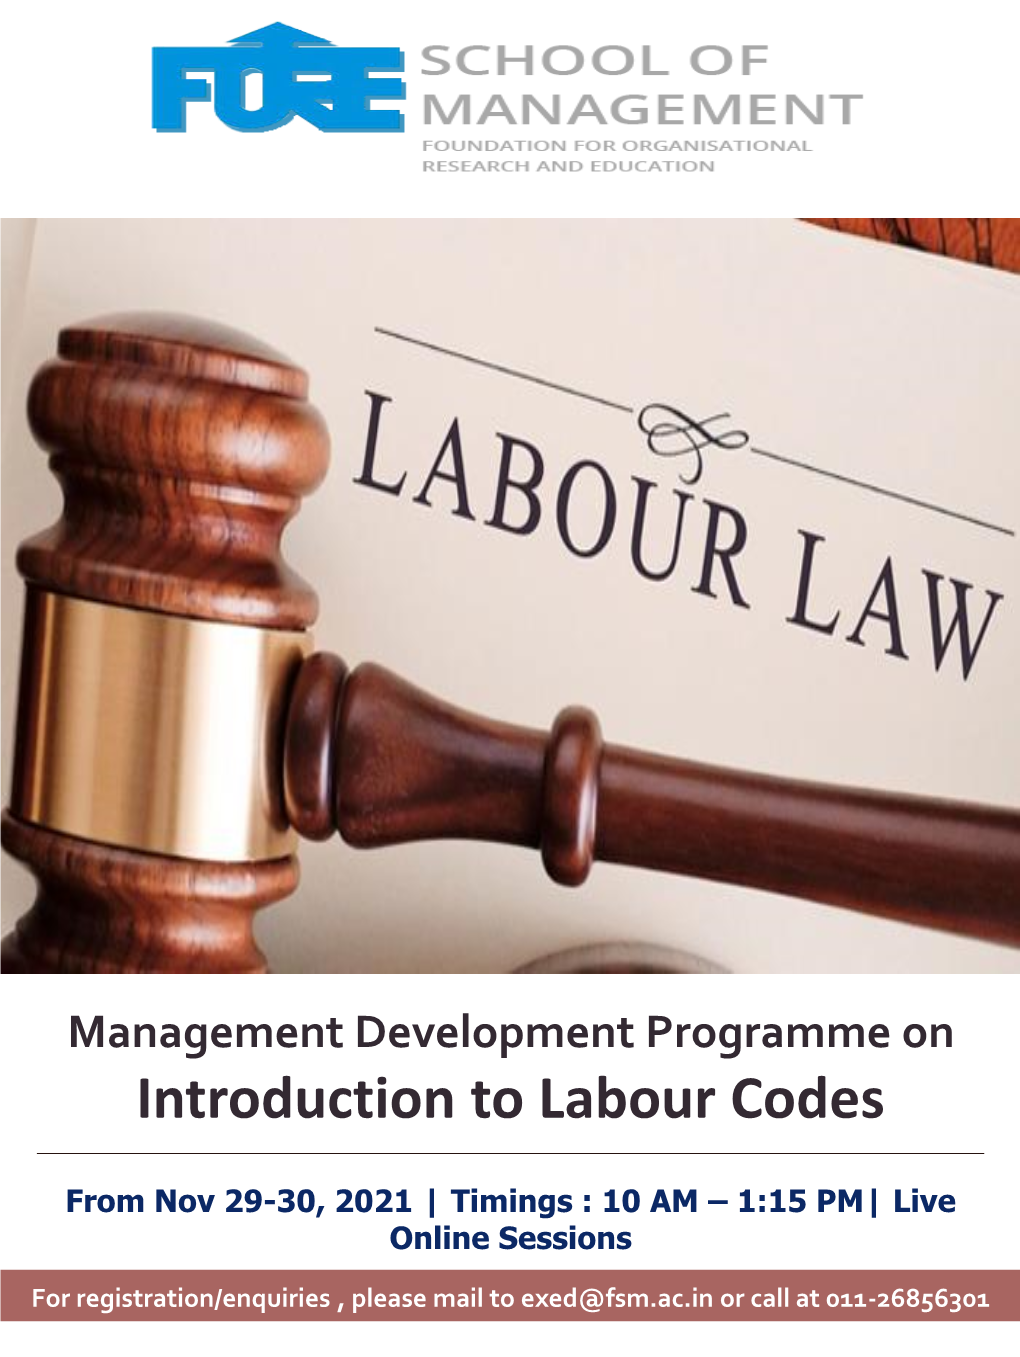 Introduction to Labour Codes